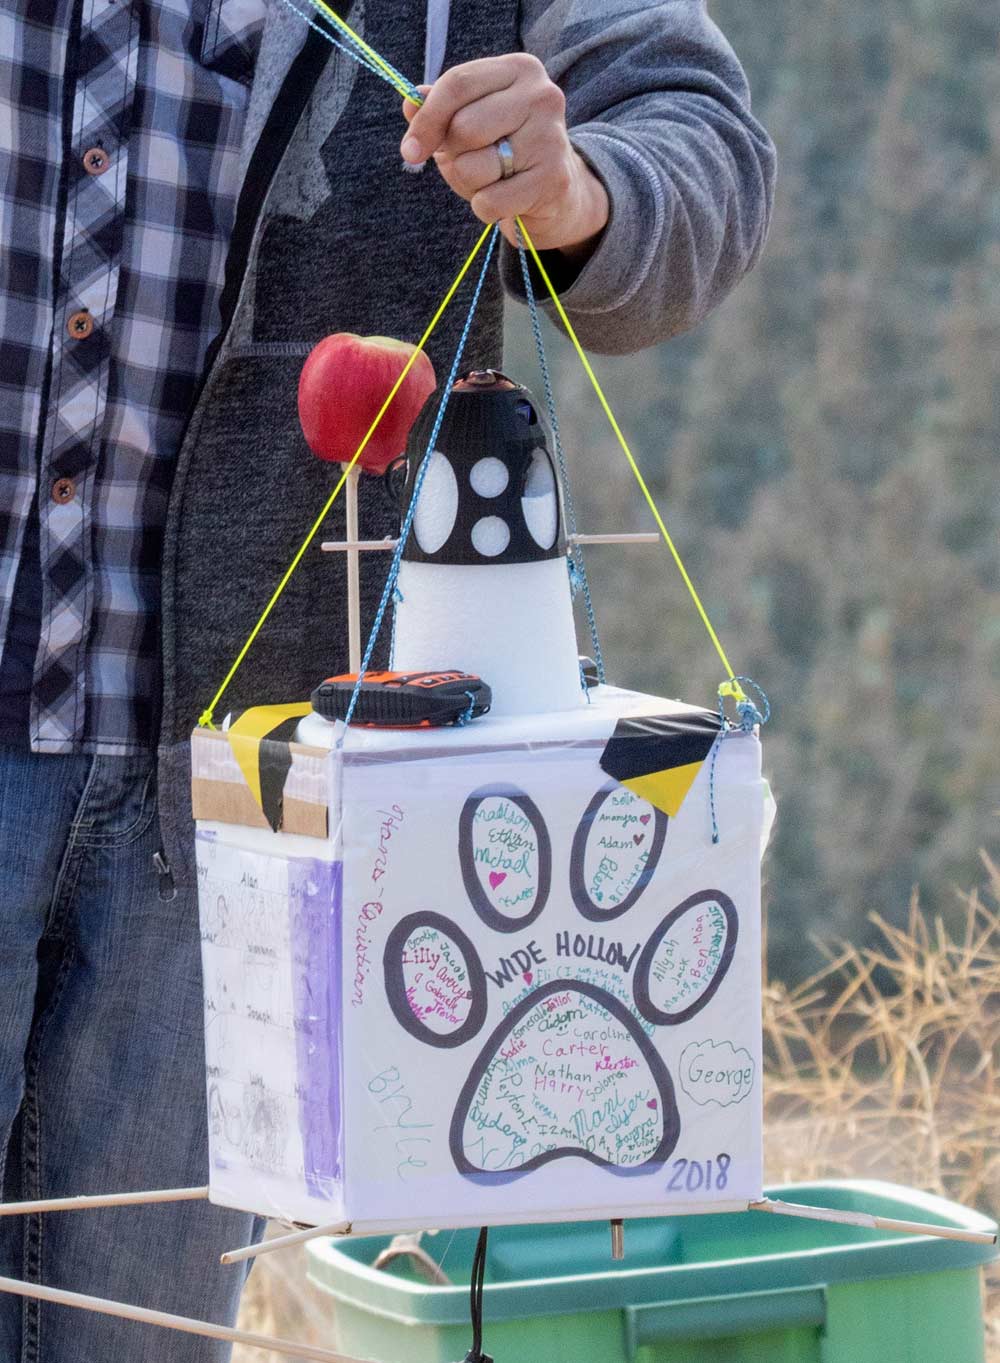 Before launch, Potter holds a fully assembled launch box that contains a 180-degree virtual reality camera and a freshly picked Autumn Glory apple. The apple ultimately flew about 20 miles above the earth. (TJ Mullinax/Good Fruit Grower)